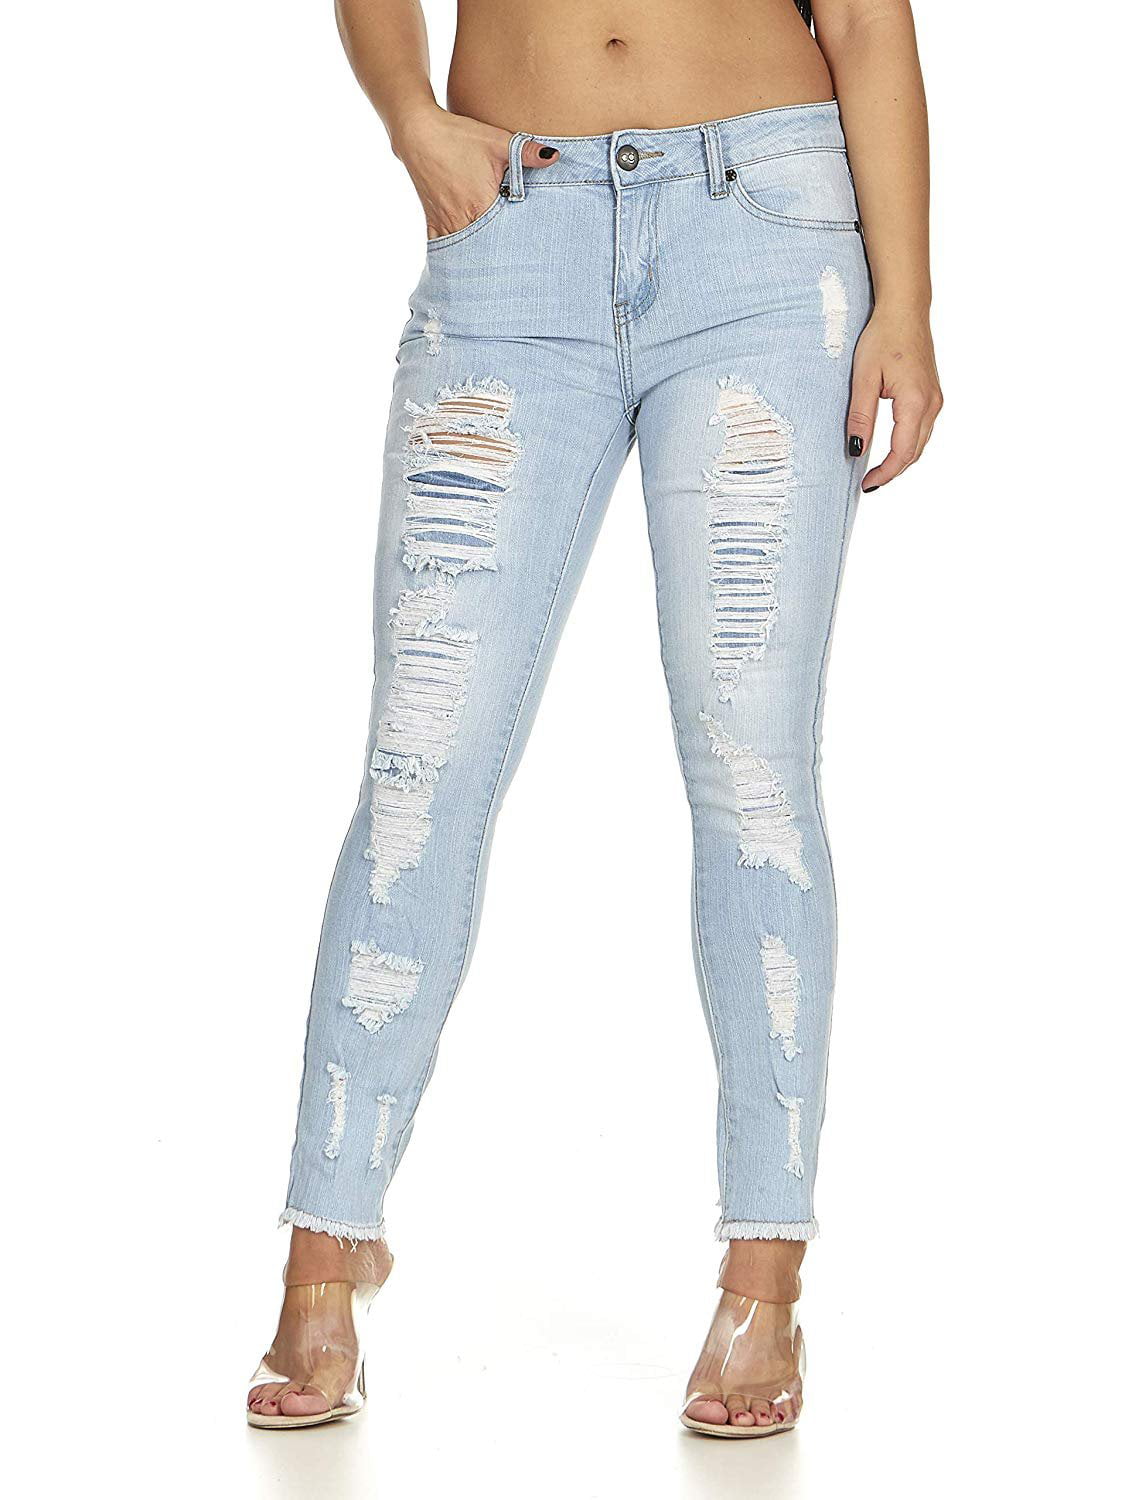 VIP Jeans Cute Ripped Jeans For Women Distressed Washed Skinny Fray